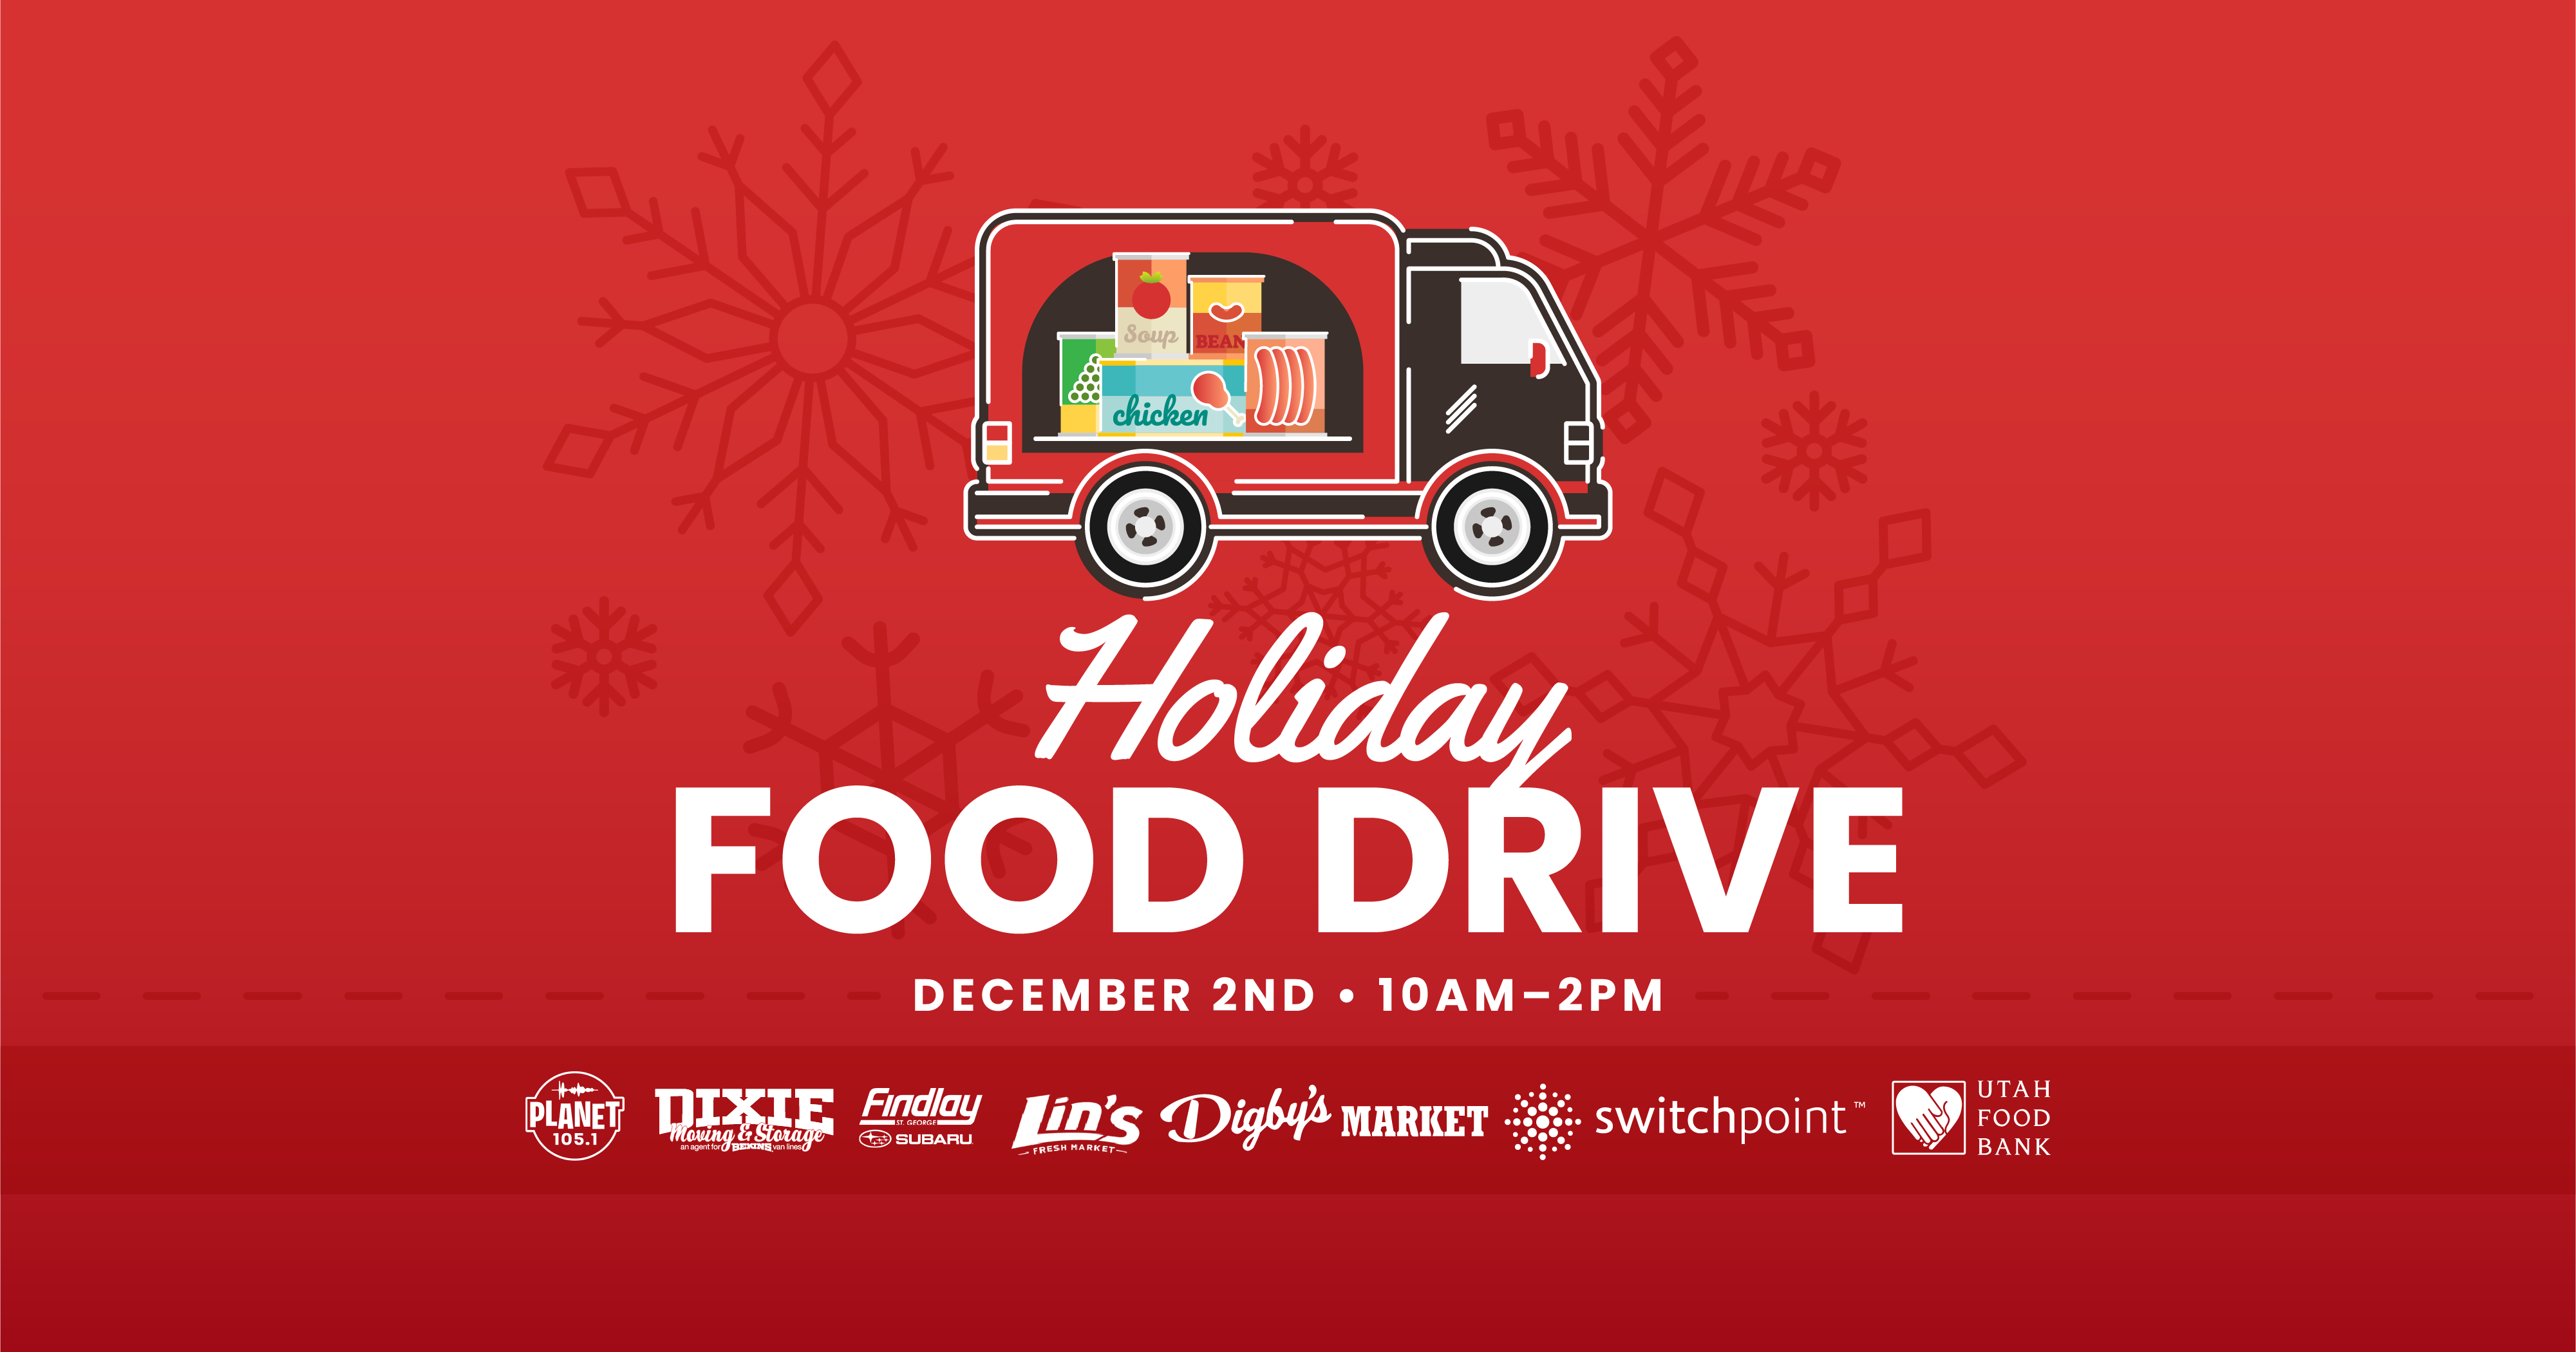 Planet 105.1 Holiday Food Drive on December 2nd